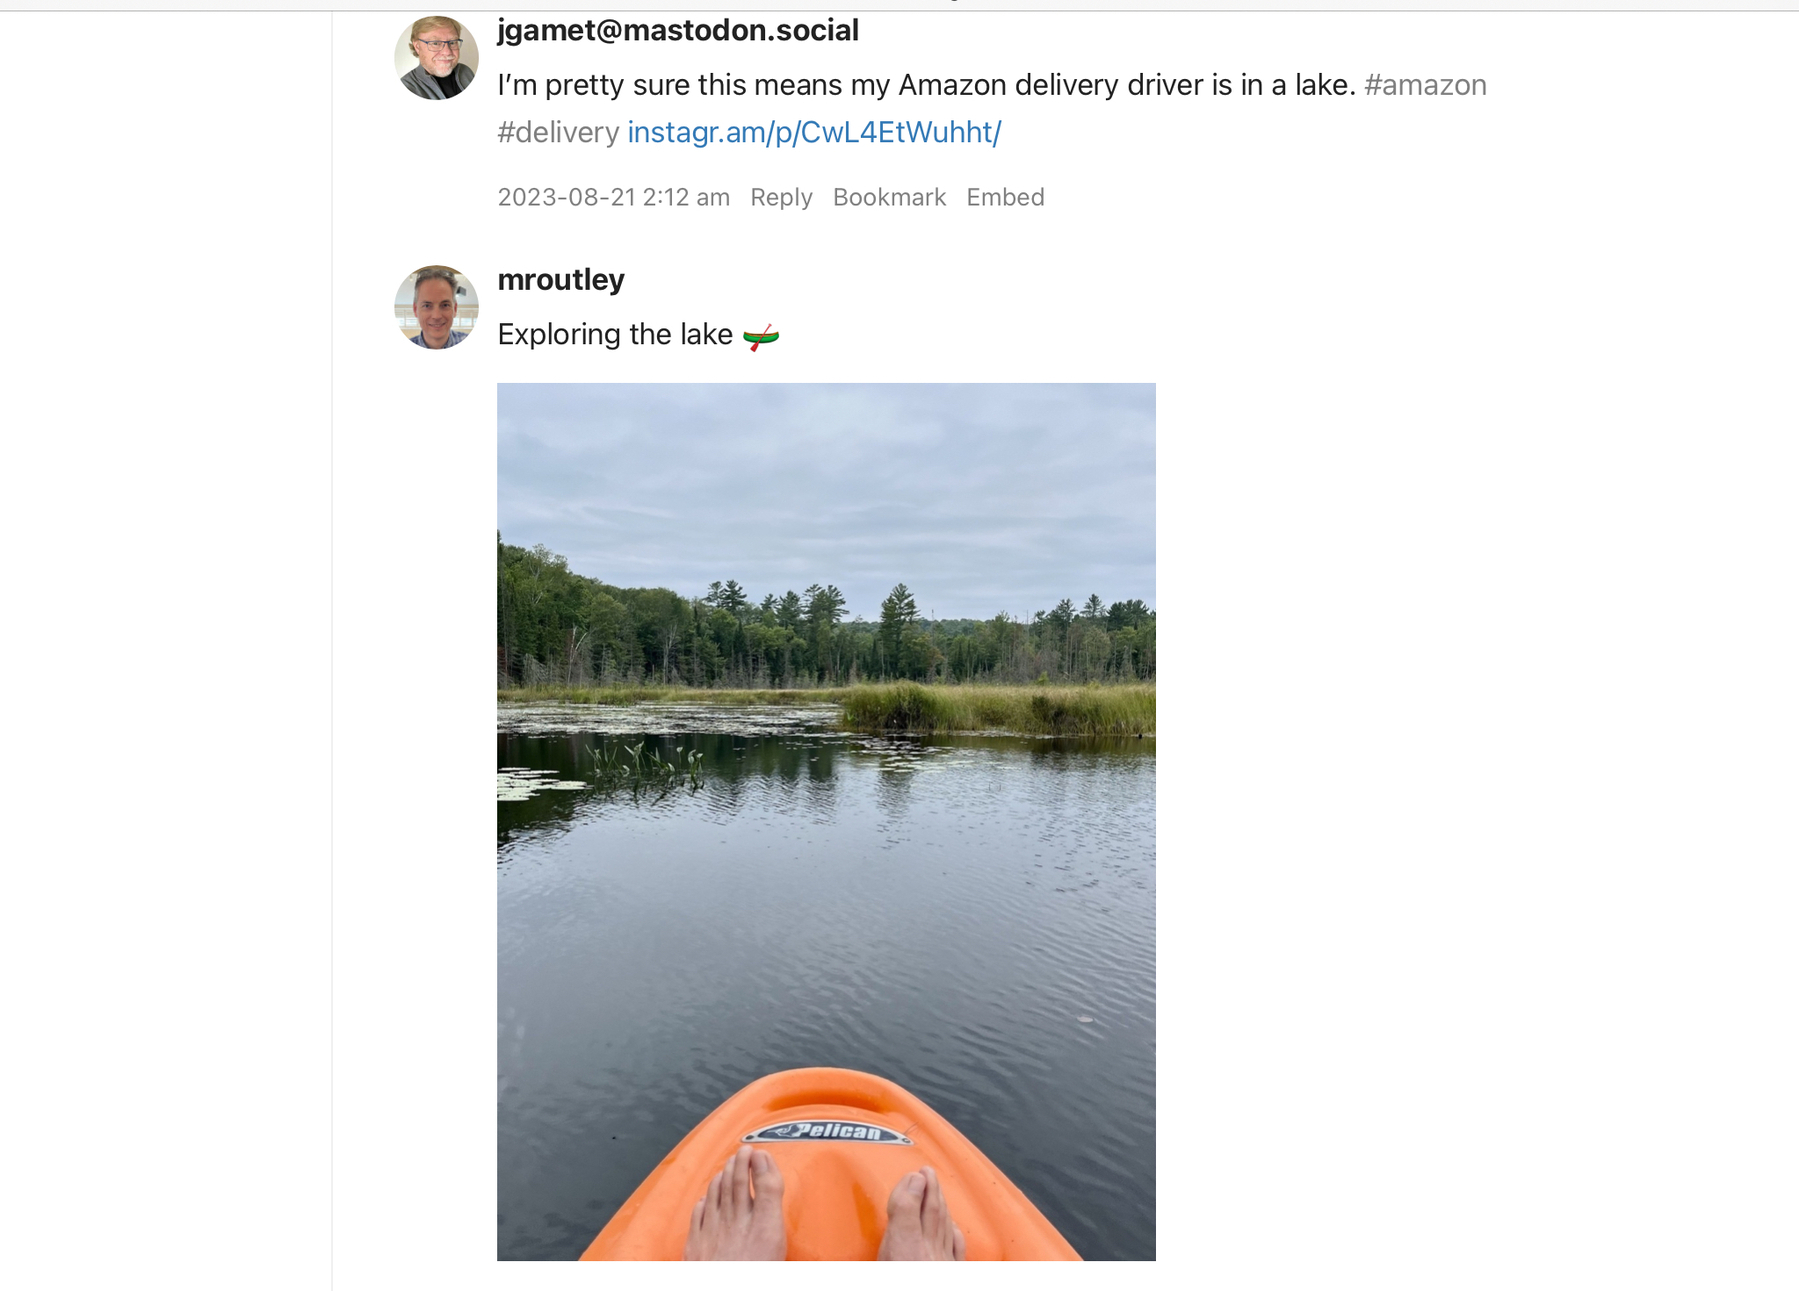 photo of lake with someone barefeet in a boat